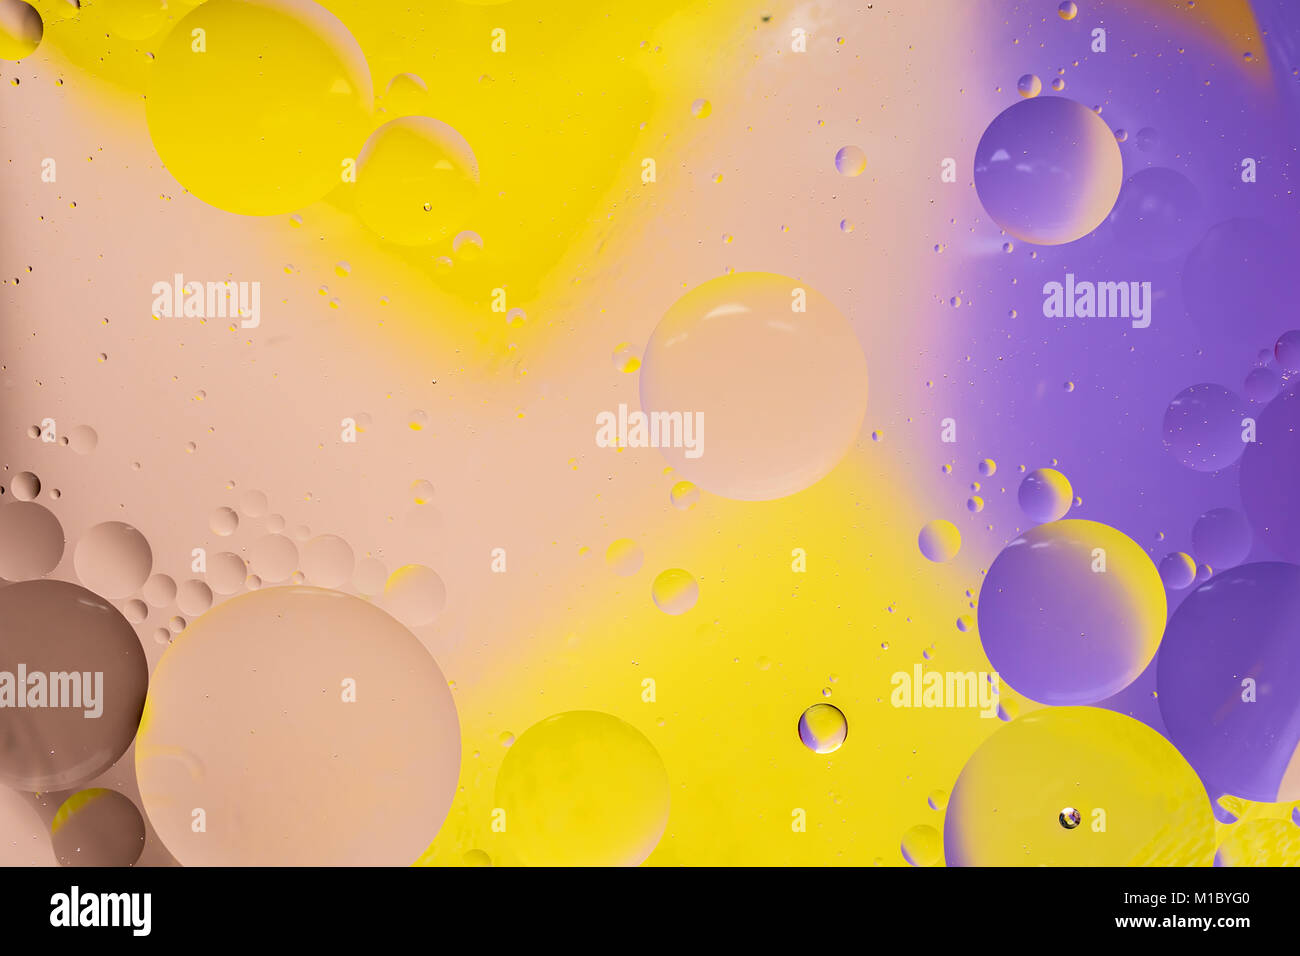 Abstract colorful Background Oil in Water surface Foam of Soap with Bubbles chemical effect macro shot close-up liquids do not mix Stock Photo